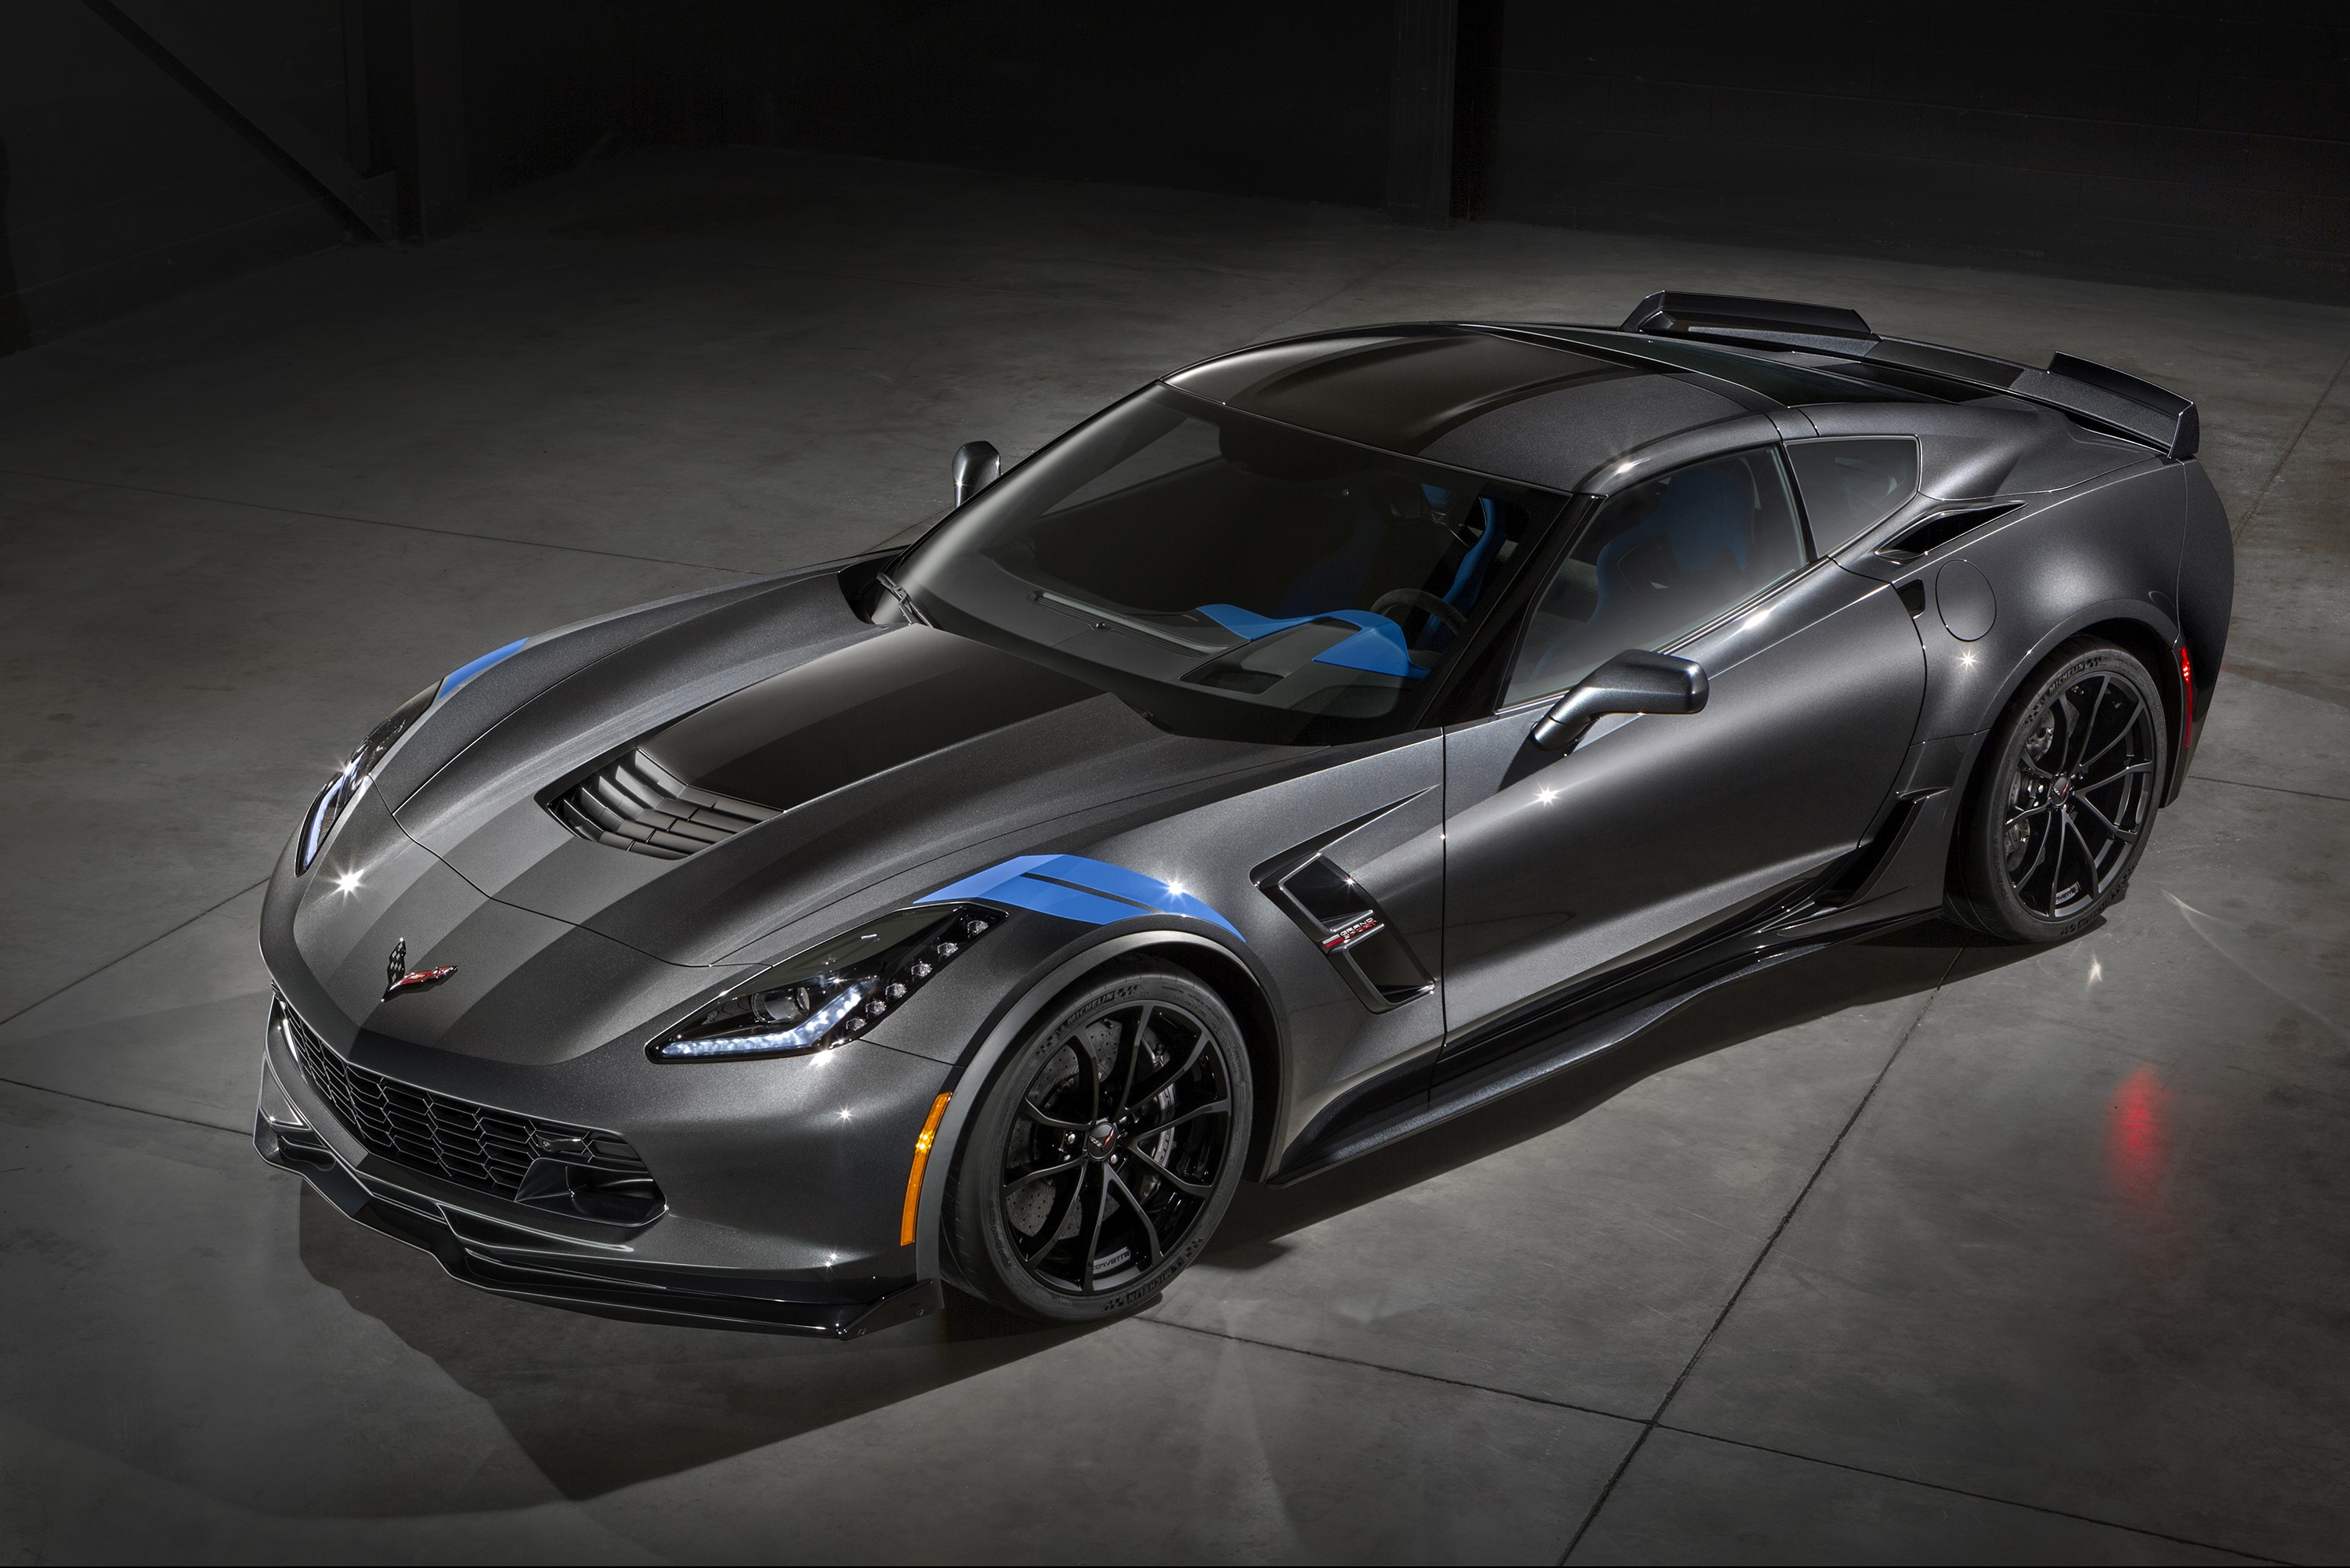 General 3000x2002 car vehicle silver cars Chevrolet Corvette Chevrolet Corvette C7 American cars